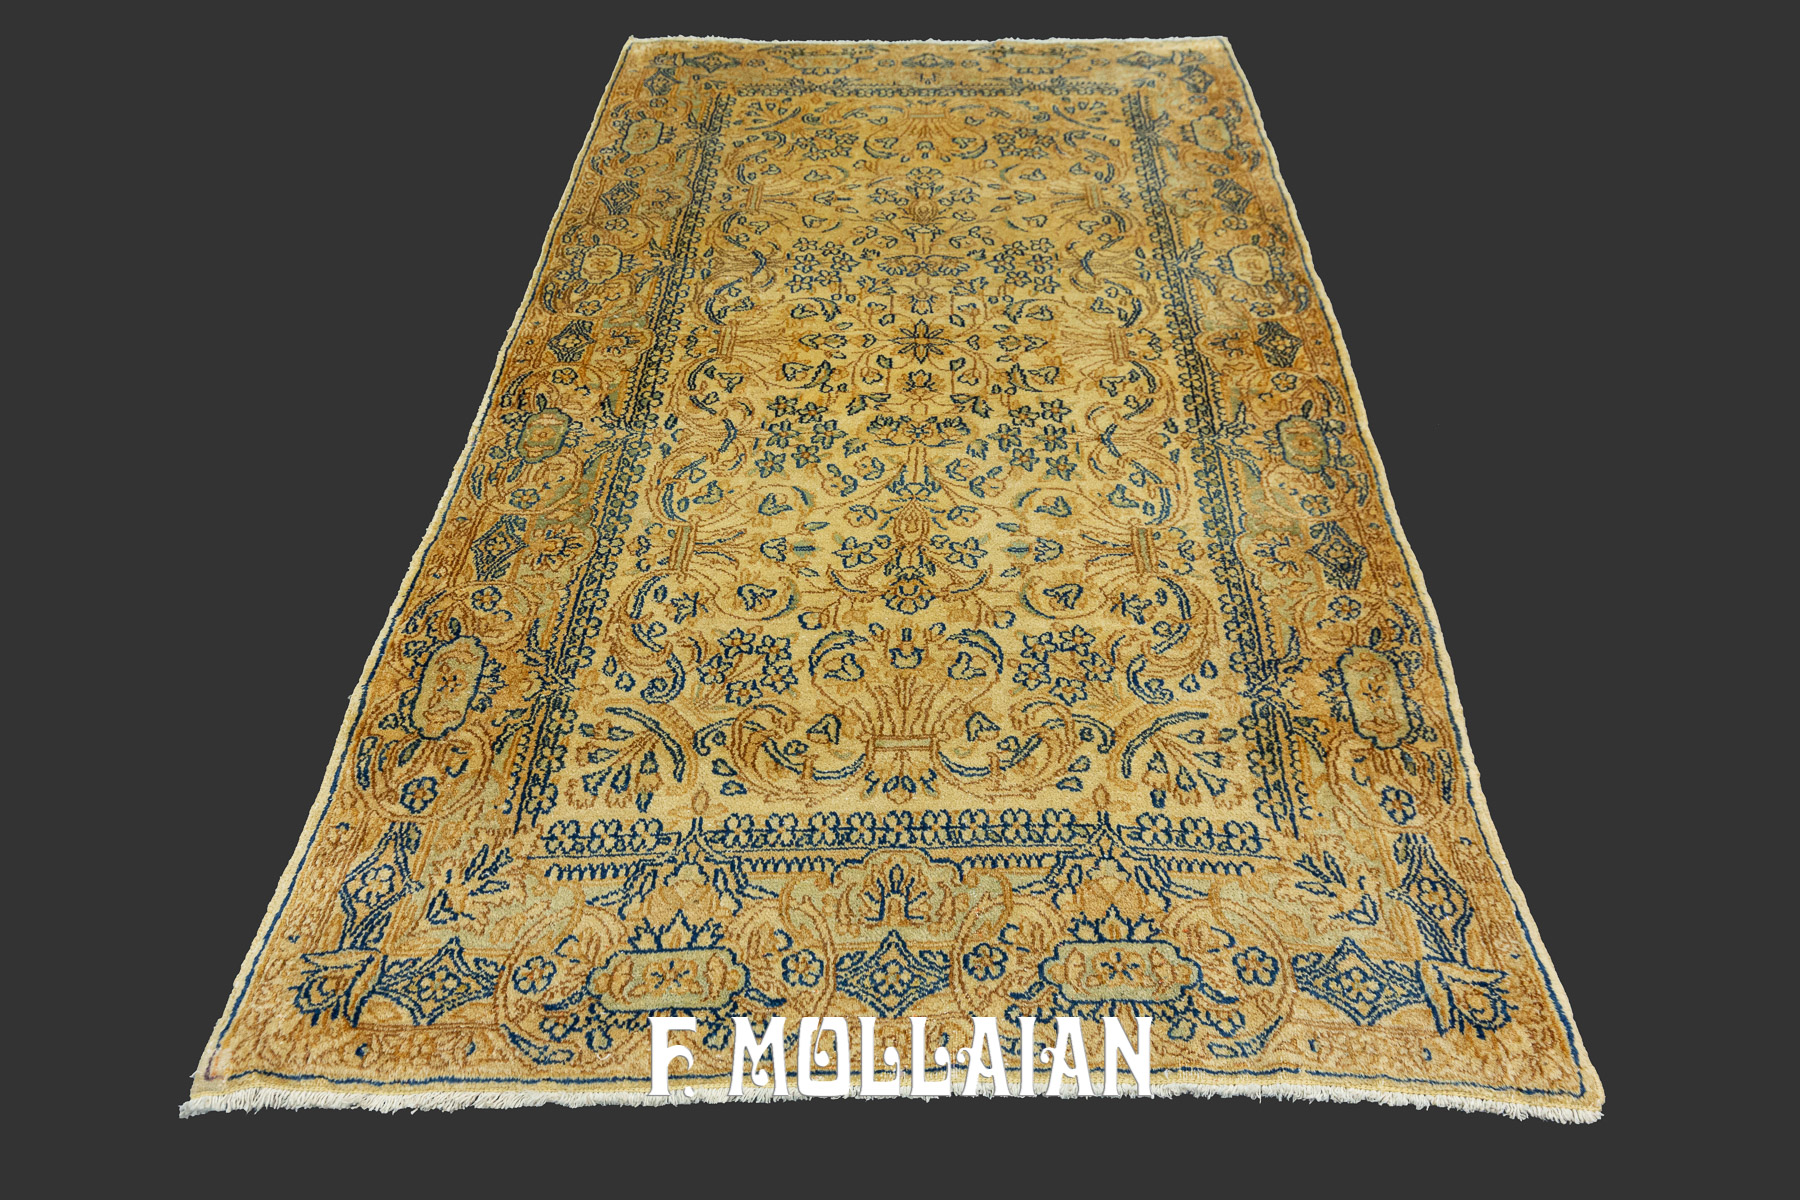 Antique Persian Kerman Hand-Knotted Cream-Beige Color Field Rug n°:53203907